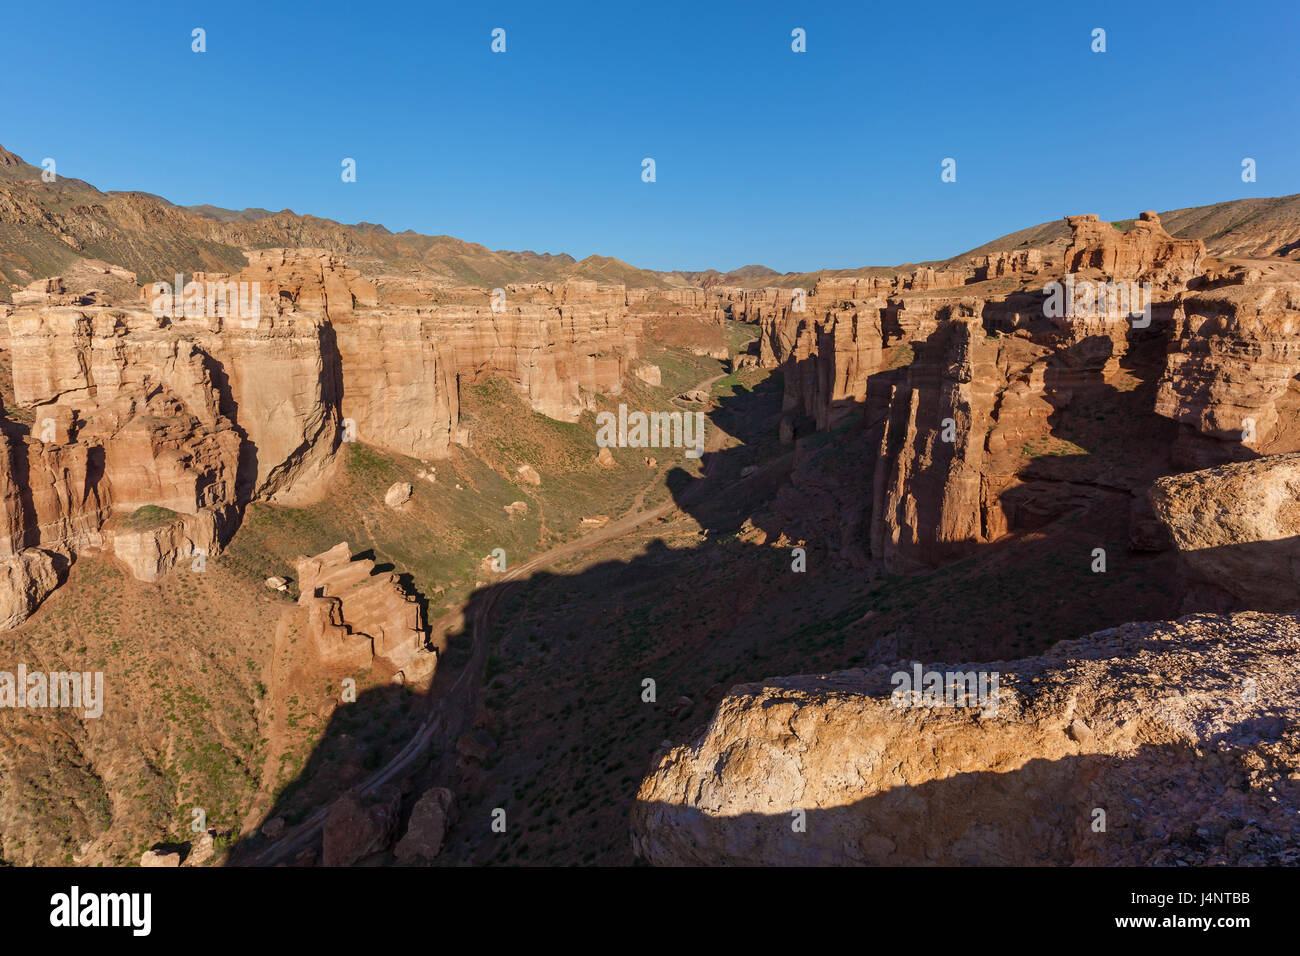 Charyn canyon, huge rocks and stones of various shapes, travel to Kazakhstan, sights of Kazakhstan, Stock Photo